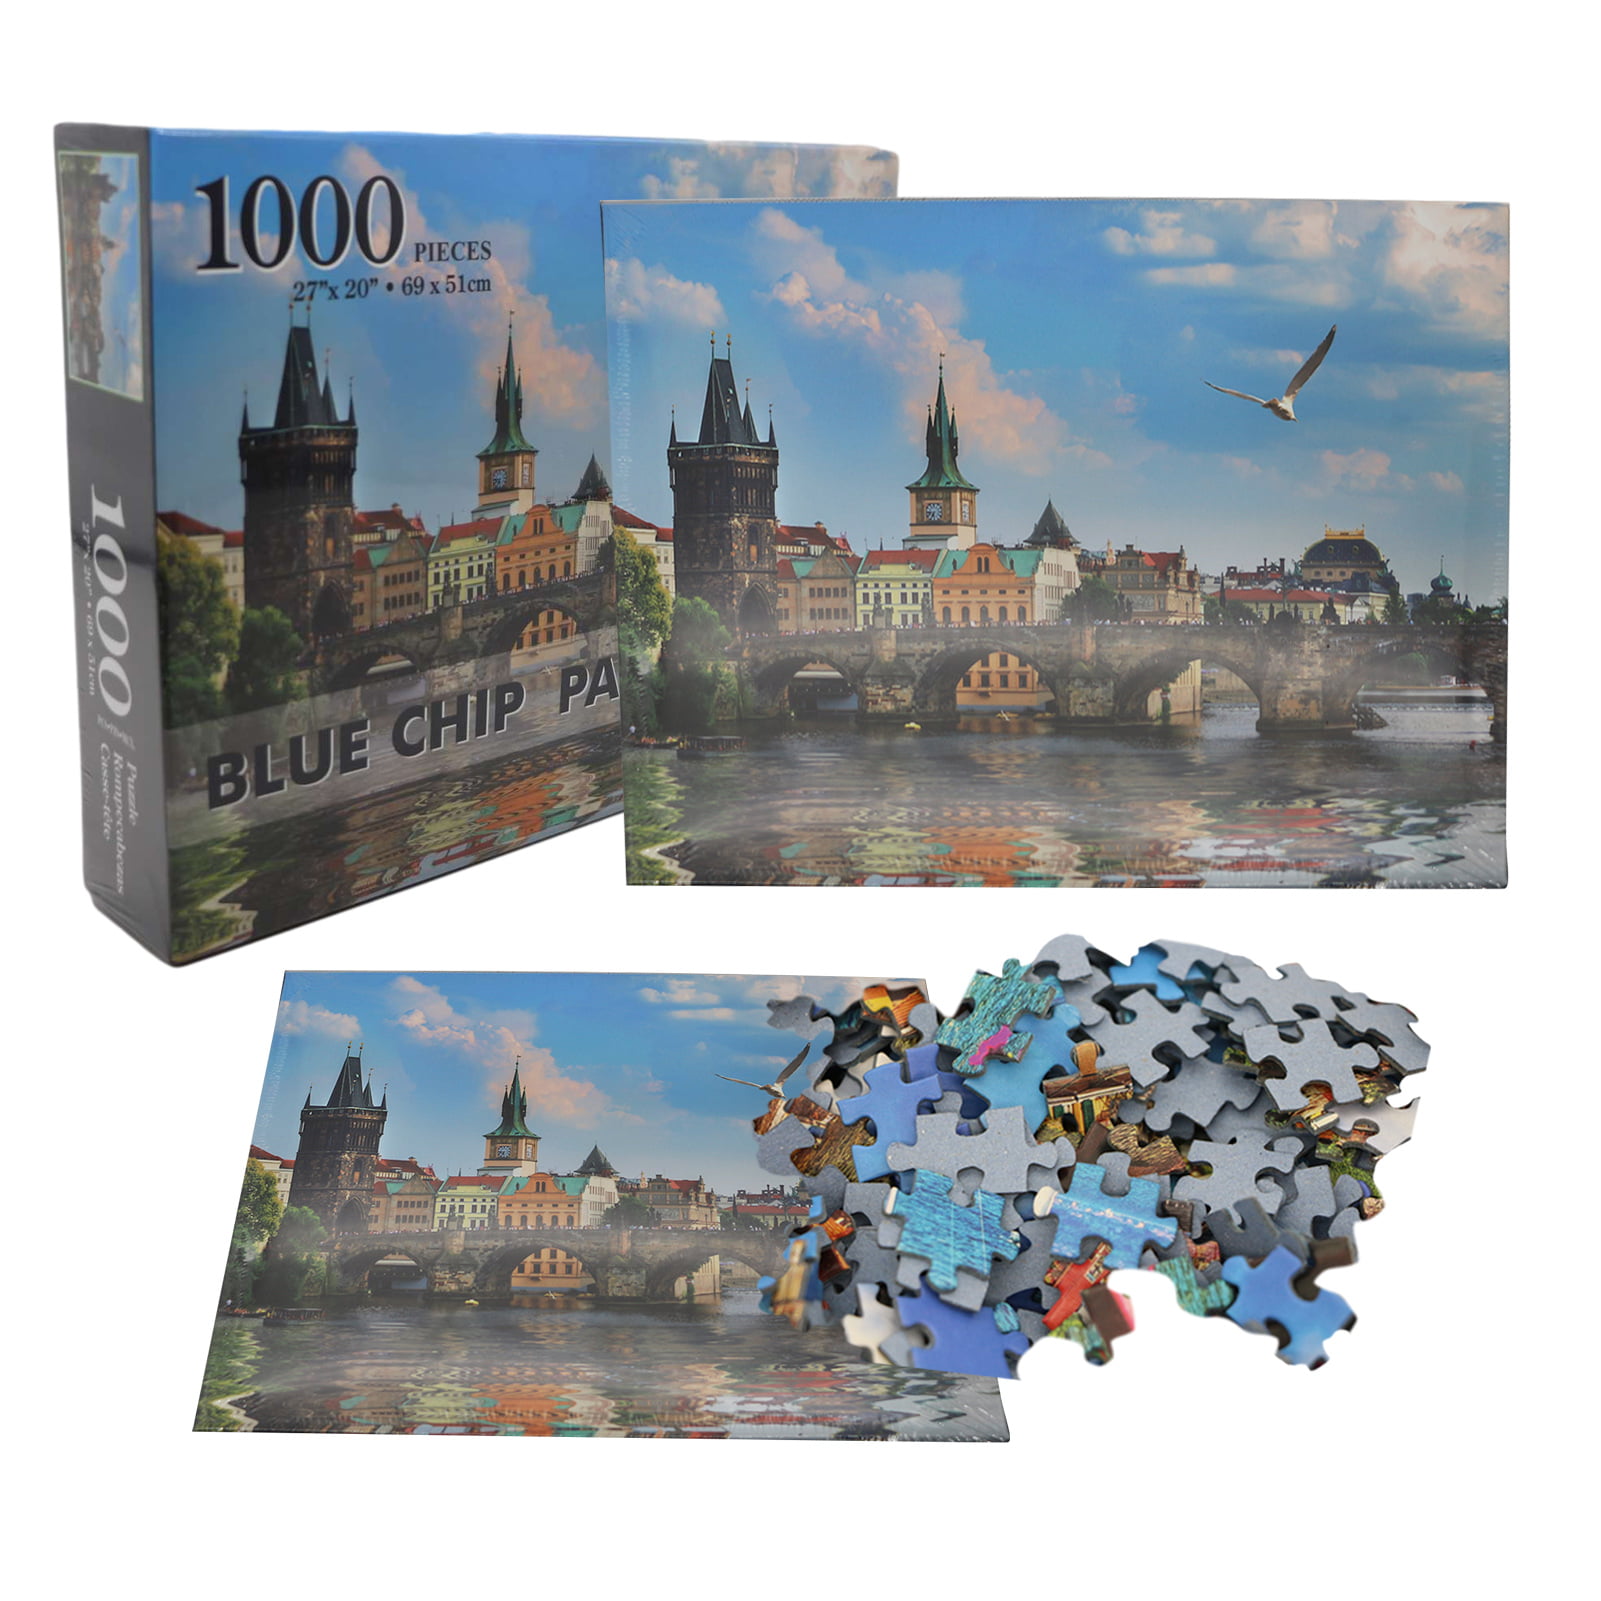 GuDoQi Bulldog Card Game Puzzle Landscape 1000 Pieces Jigsaw Puzzles for Adults 